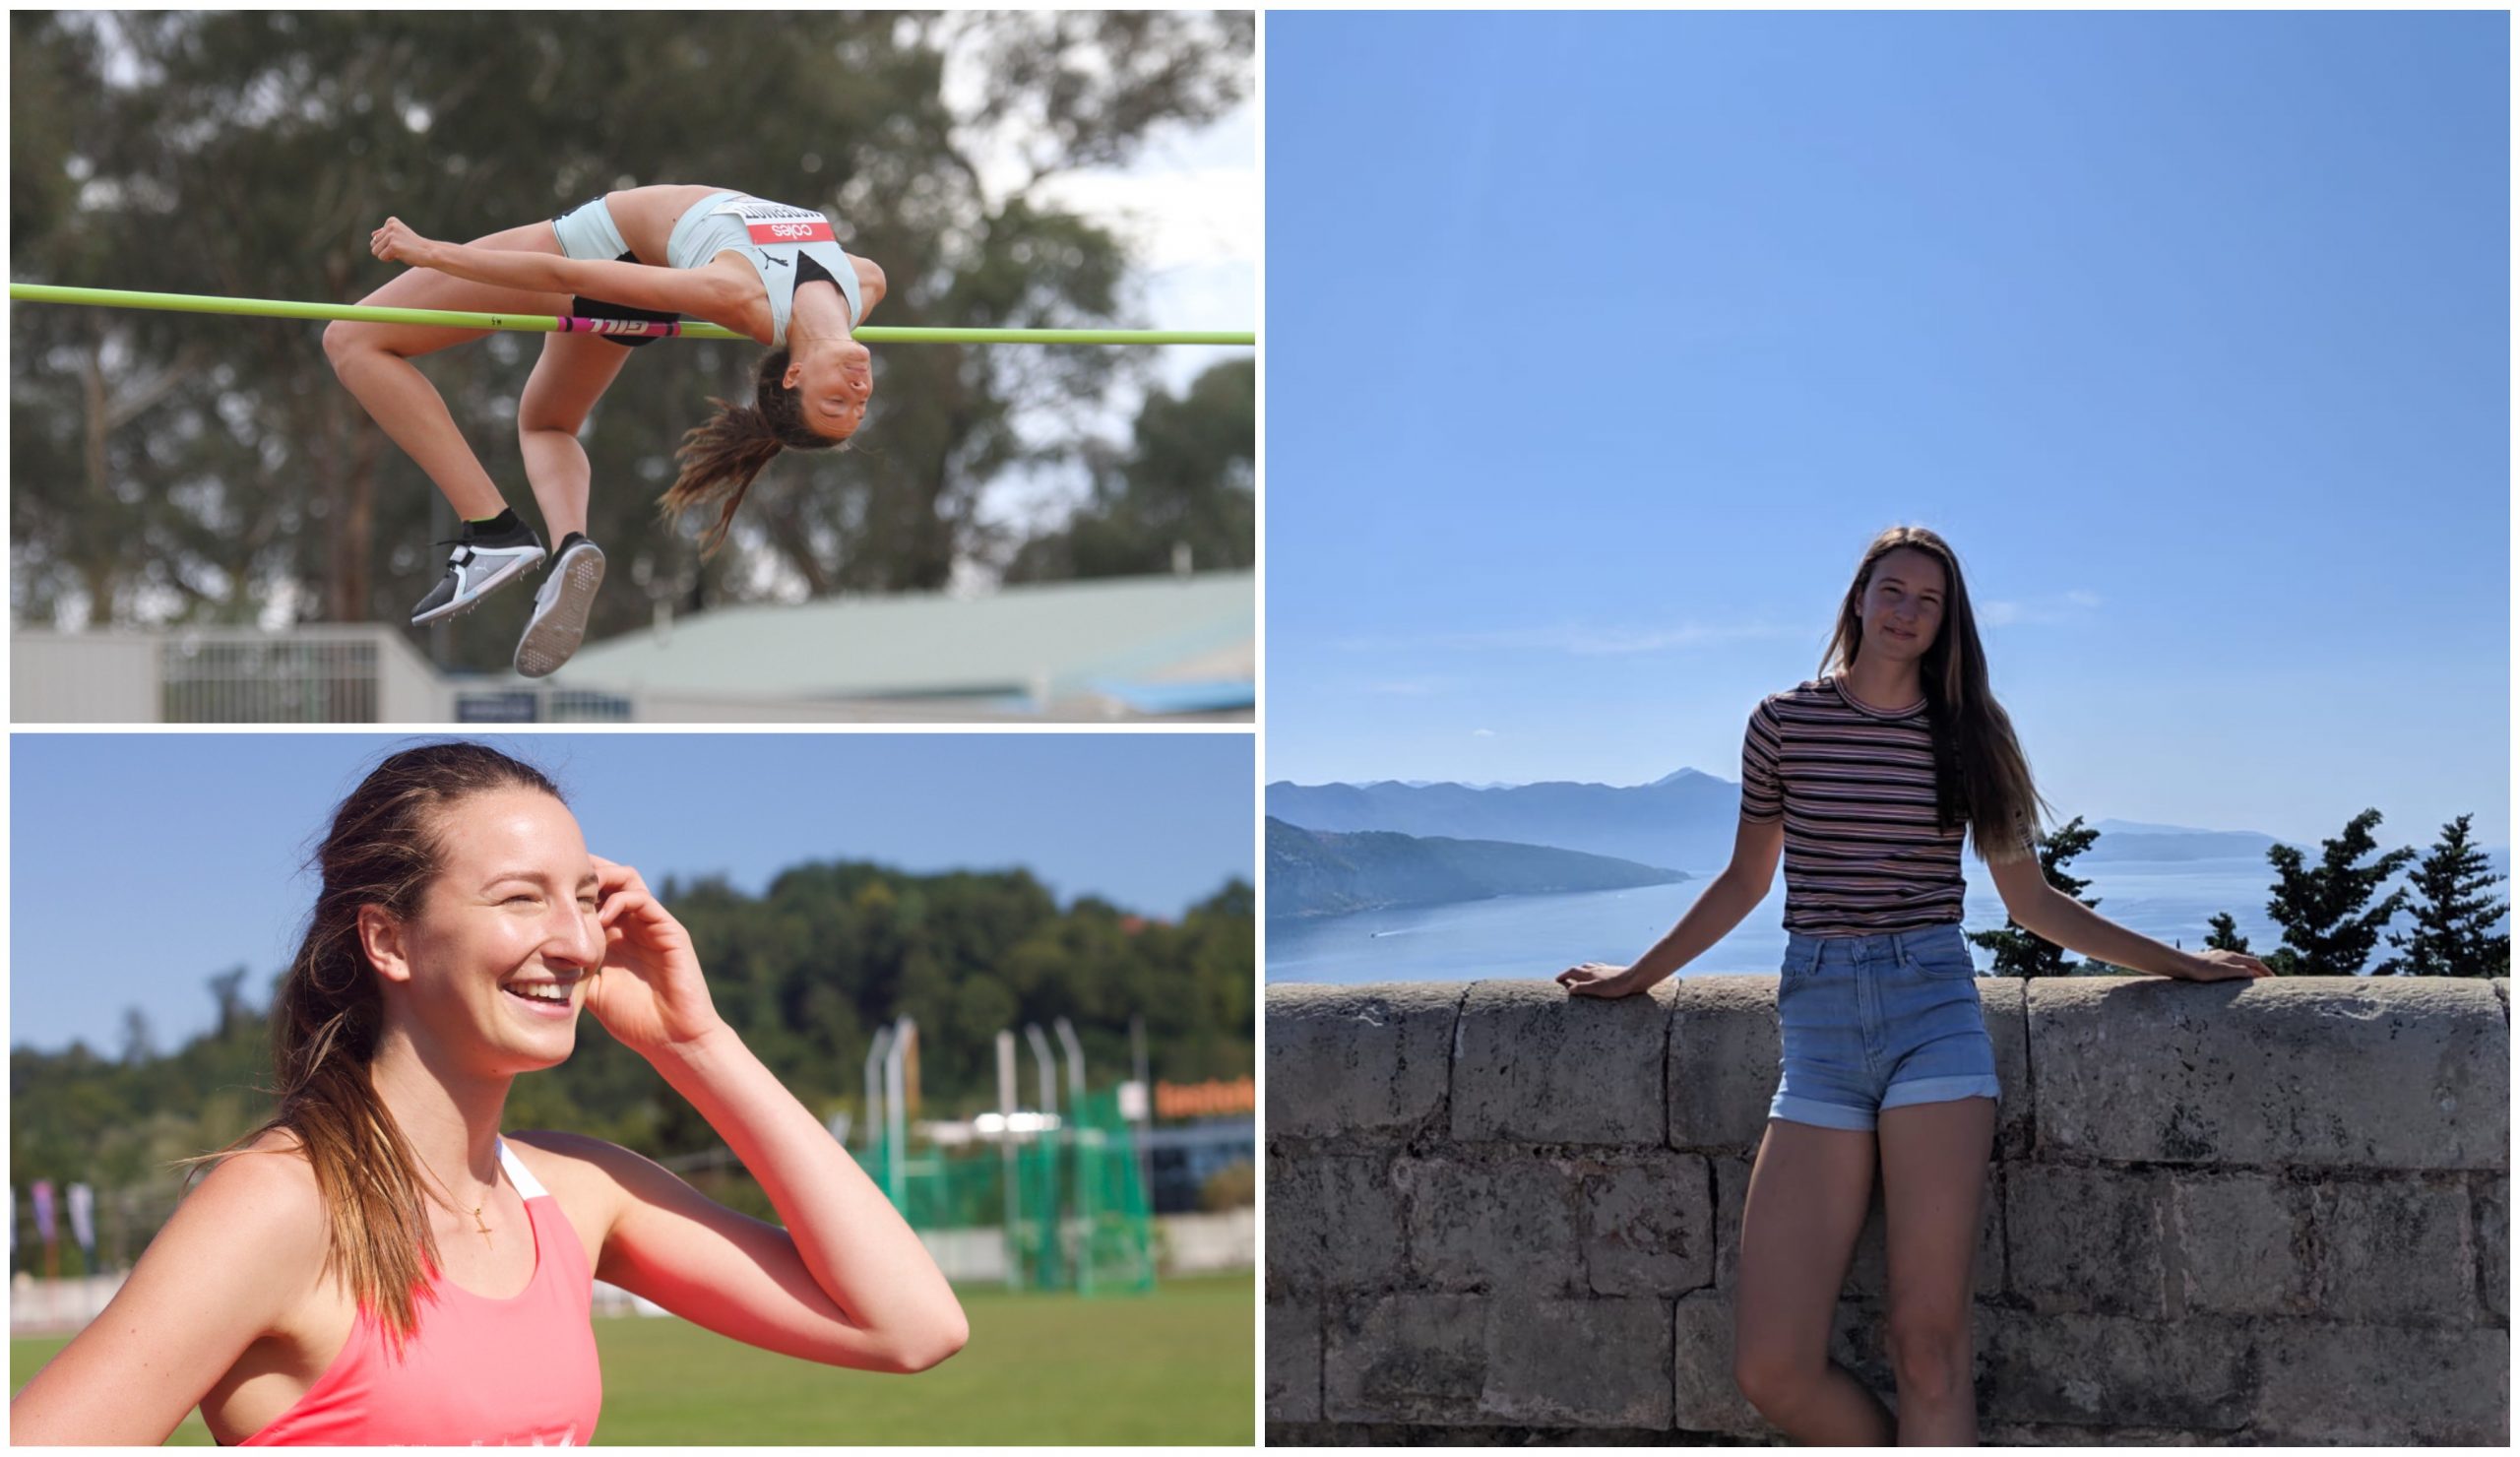 Nicola McDermott – the Australian high jump star with Croatian roots – excited to be competing in Zagreb